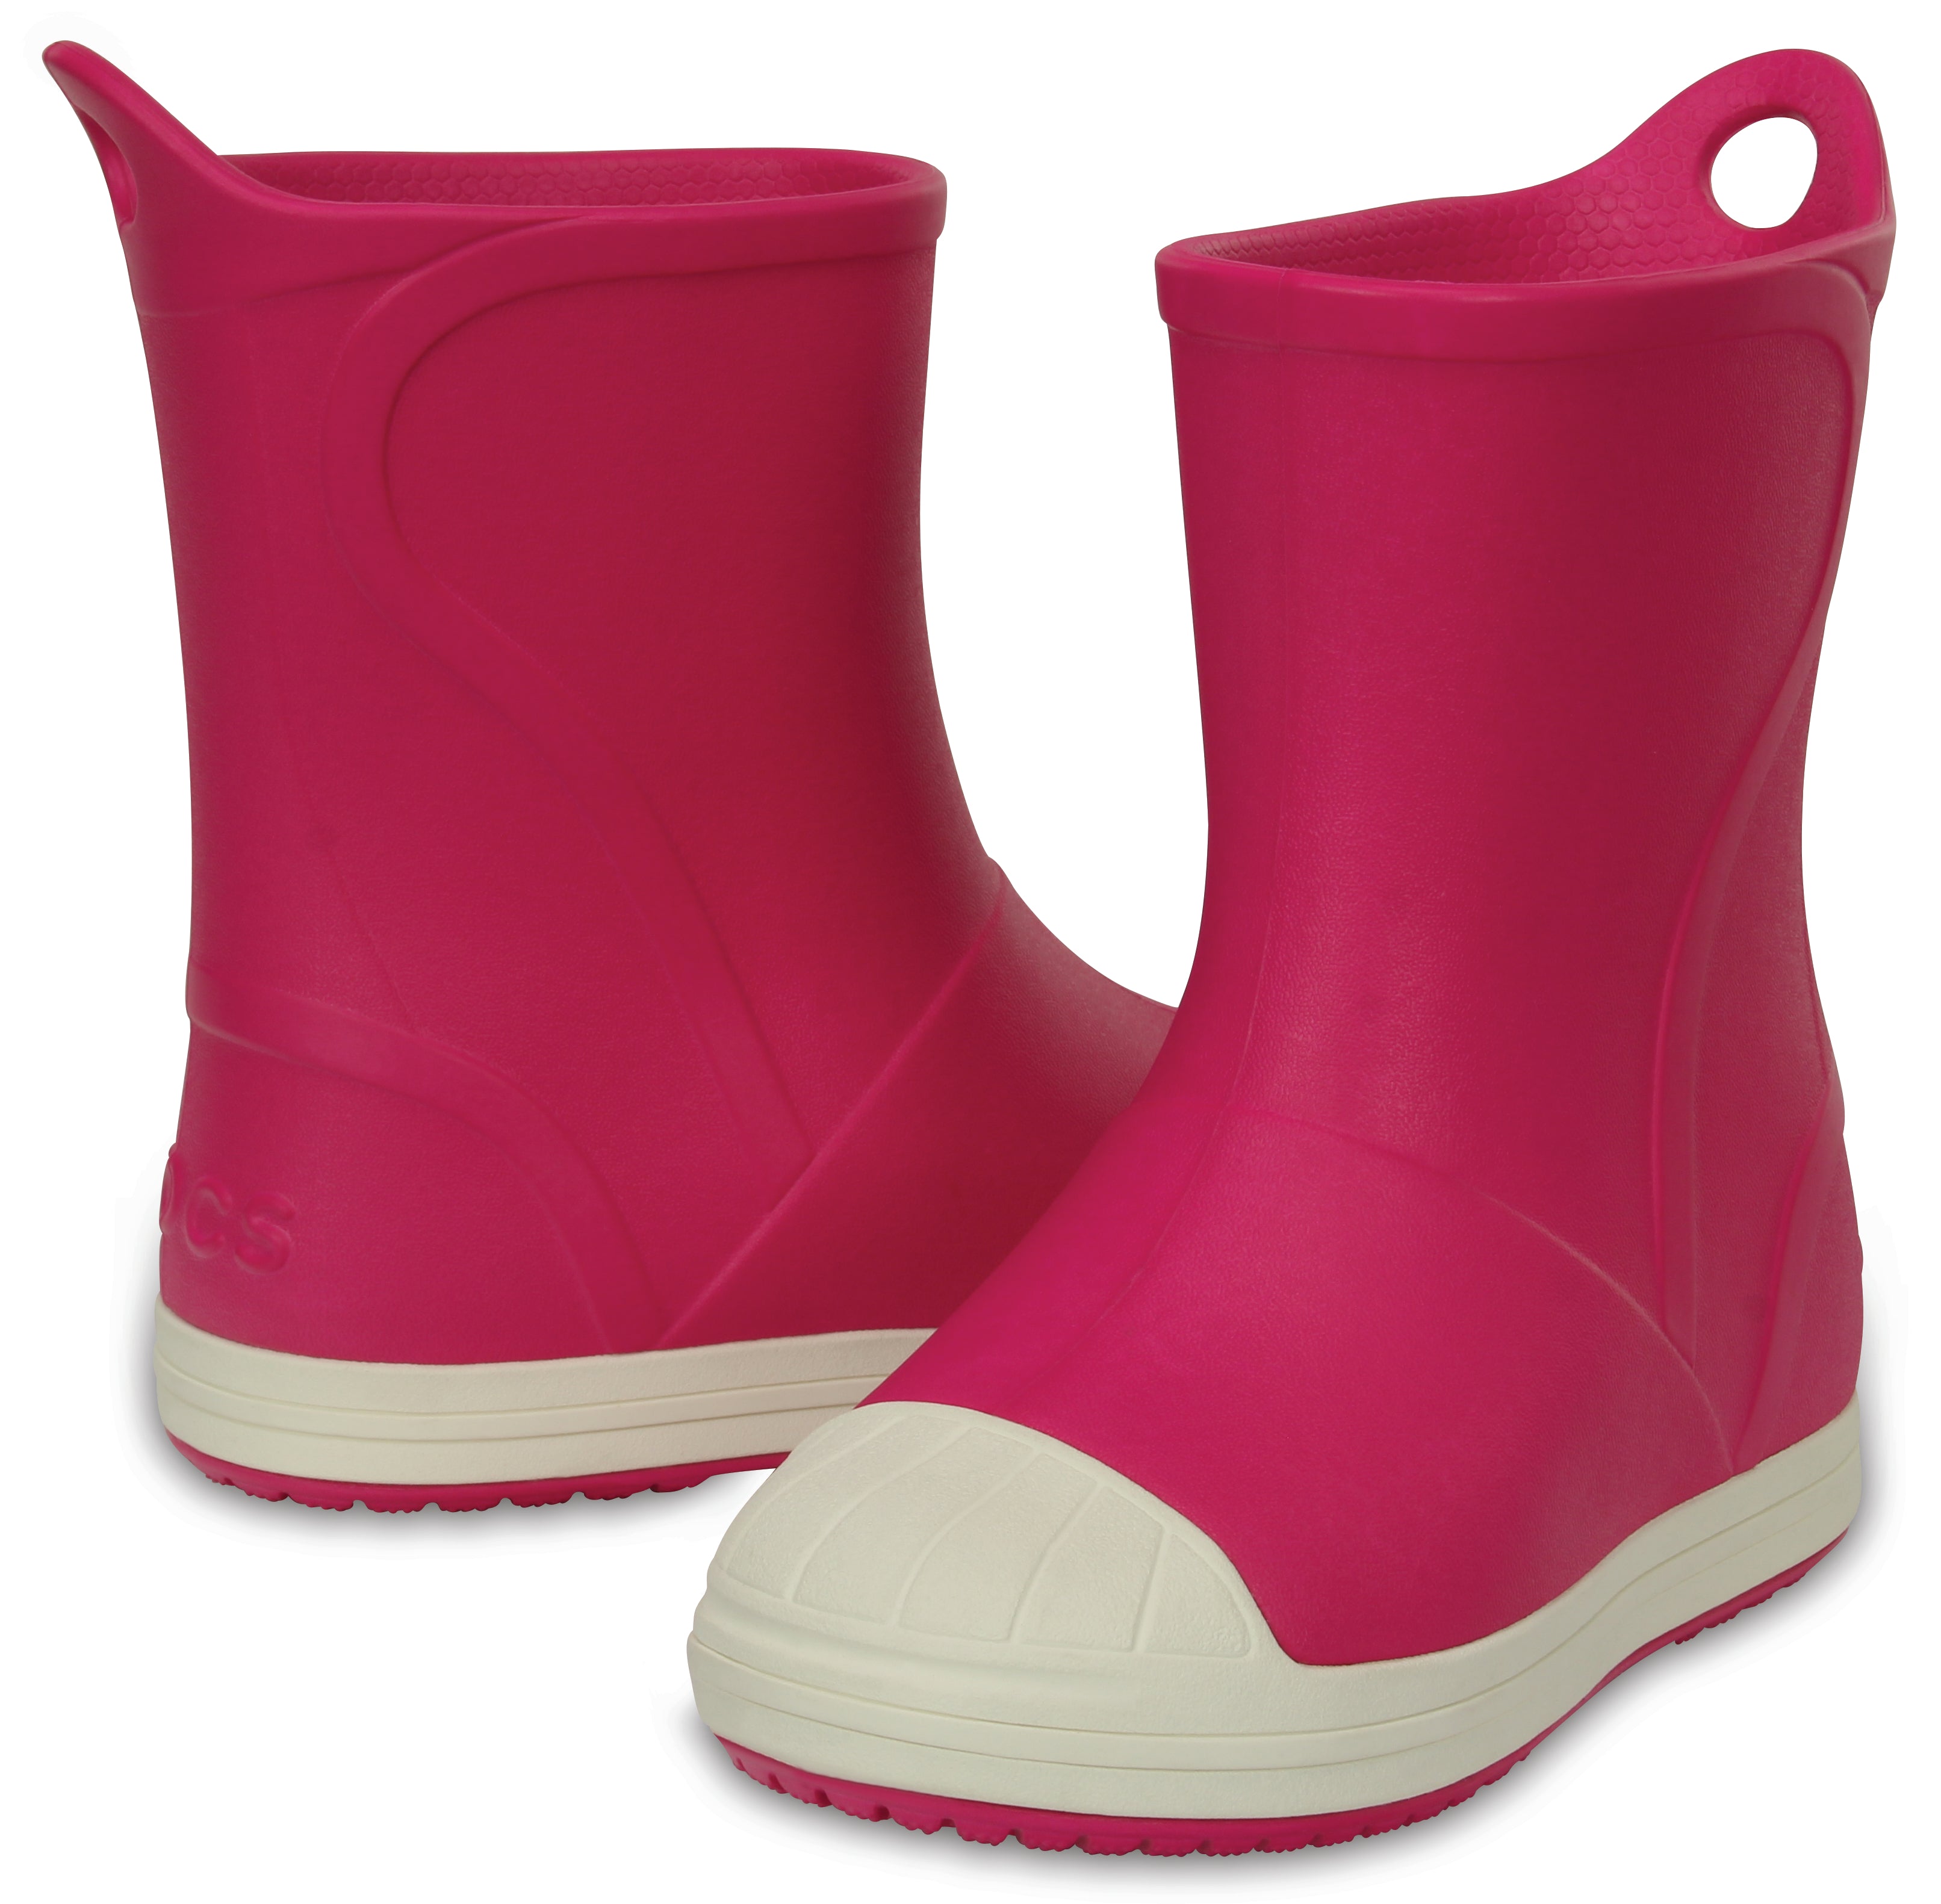 Crocs Bump It Boot Candy Pink/Oyster